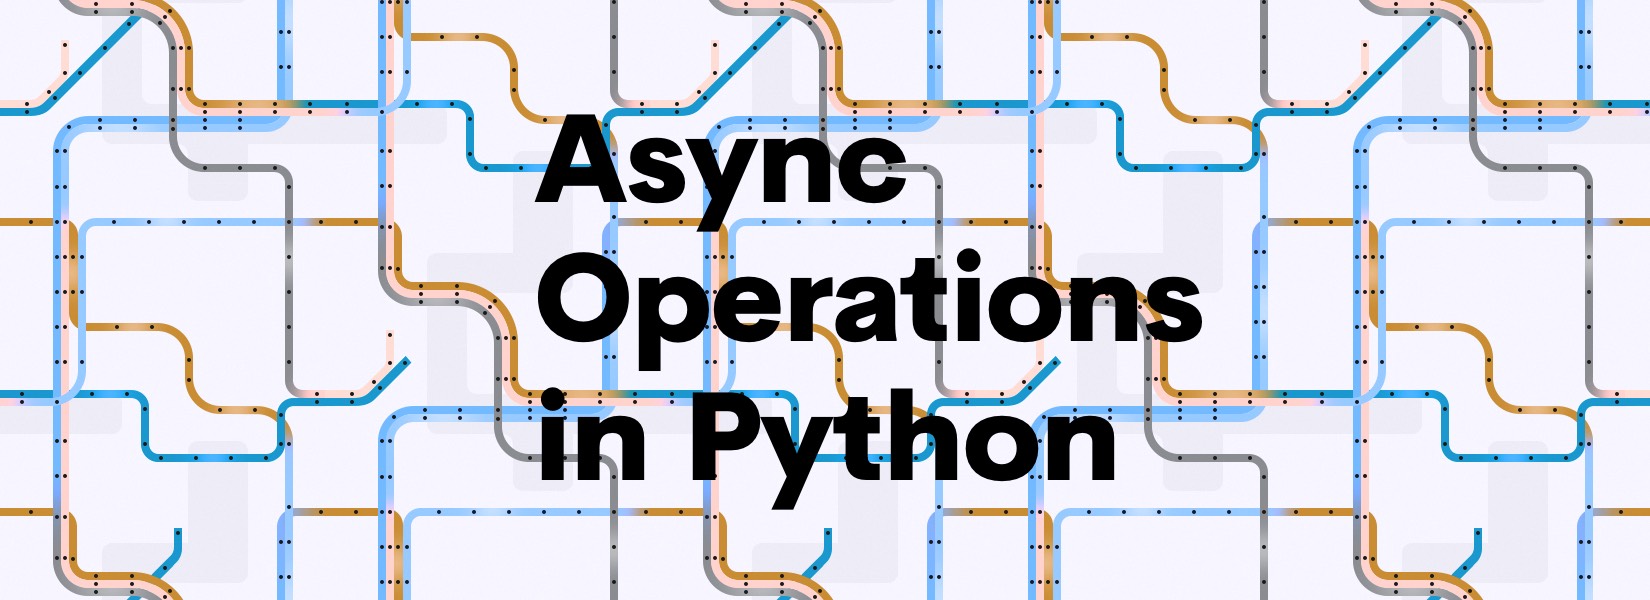 This trick will make you perform async operation in Python like a pro